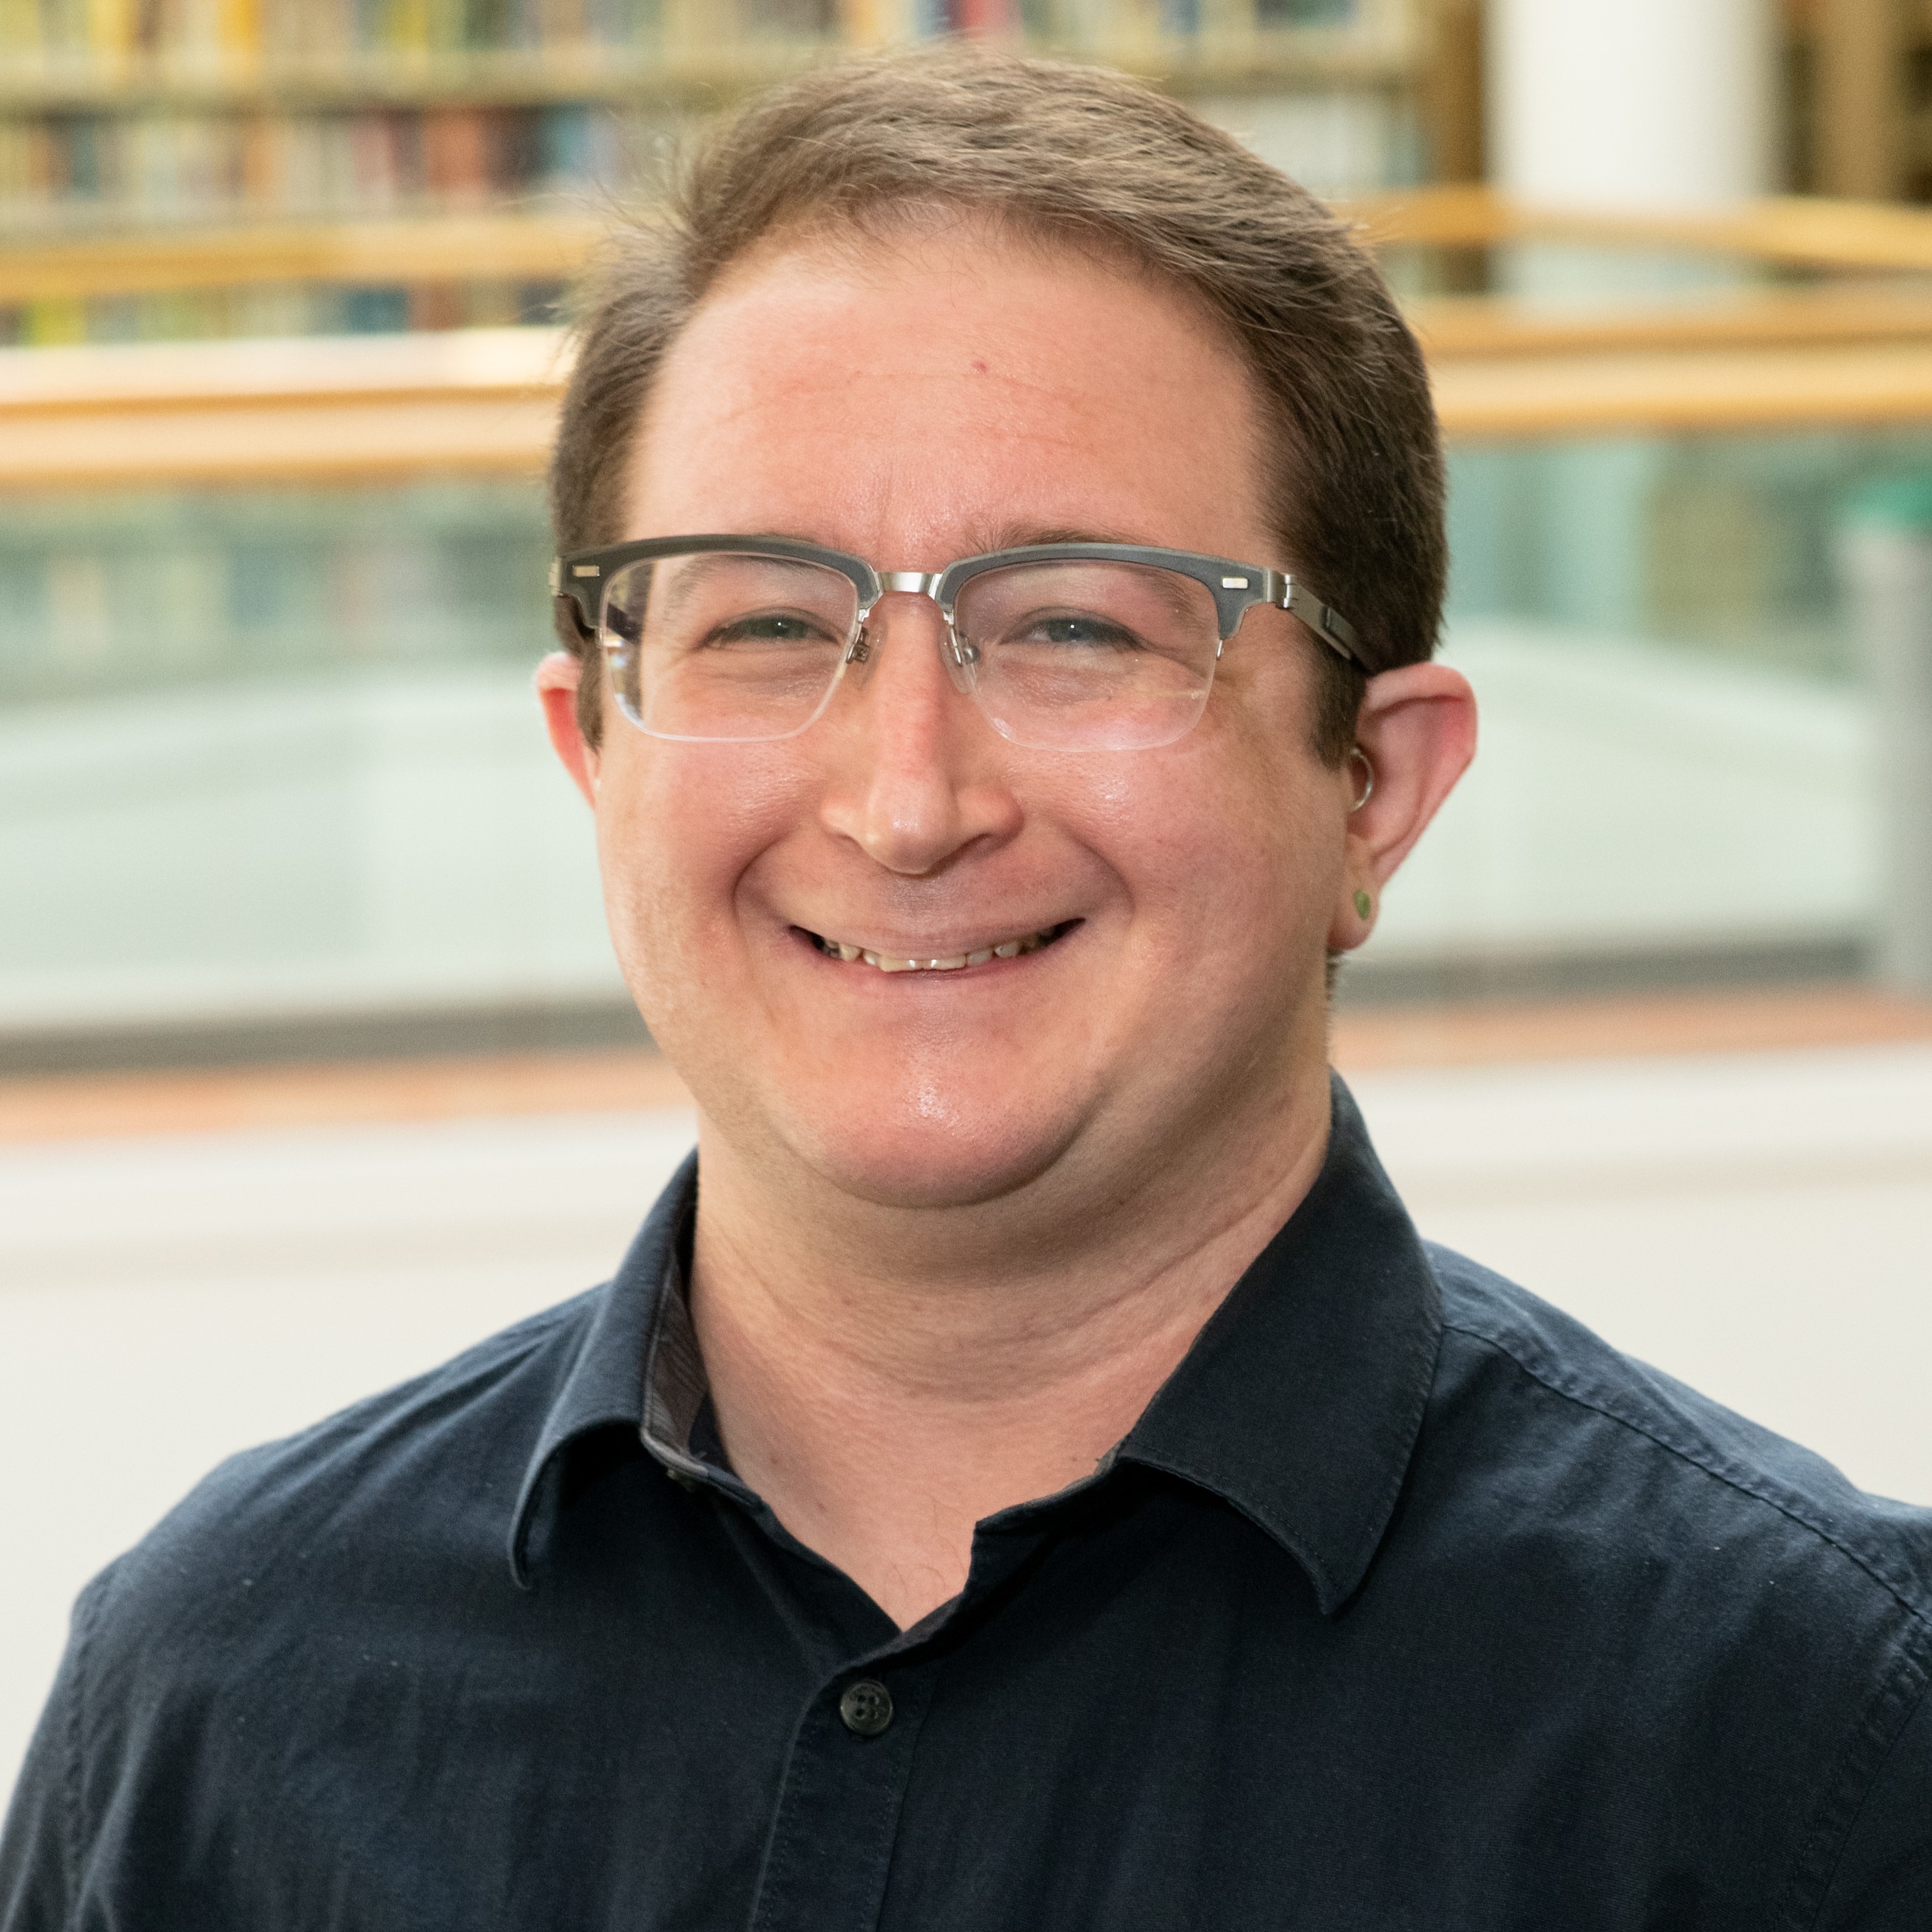 A headshot of Simon Ragovin smiling in the Hagerty Library wearing a black button down shirt.